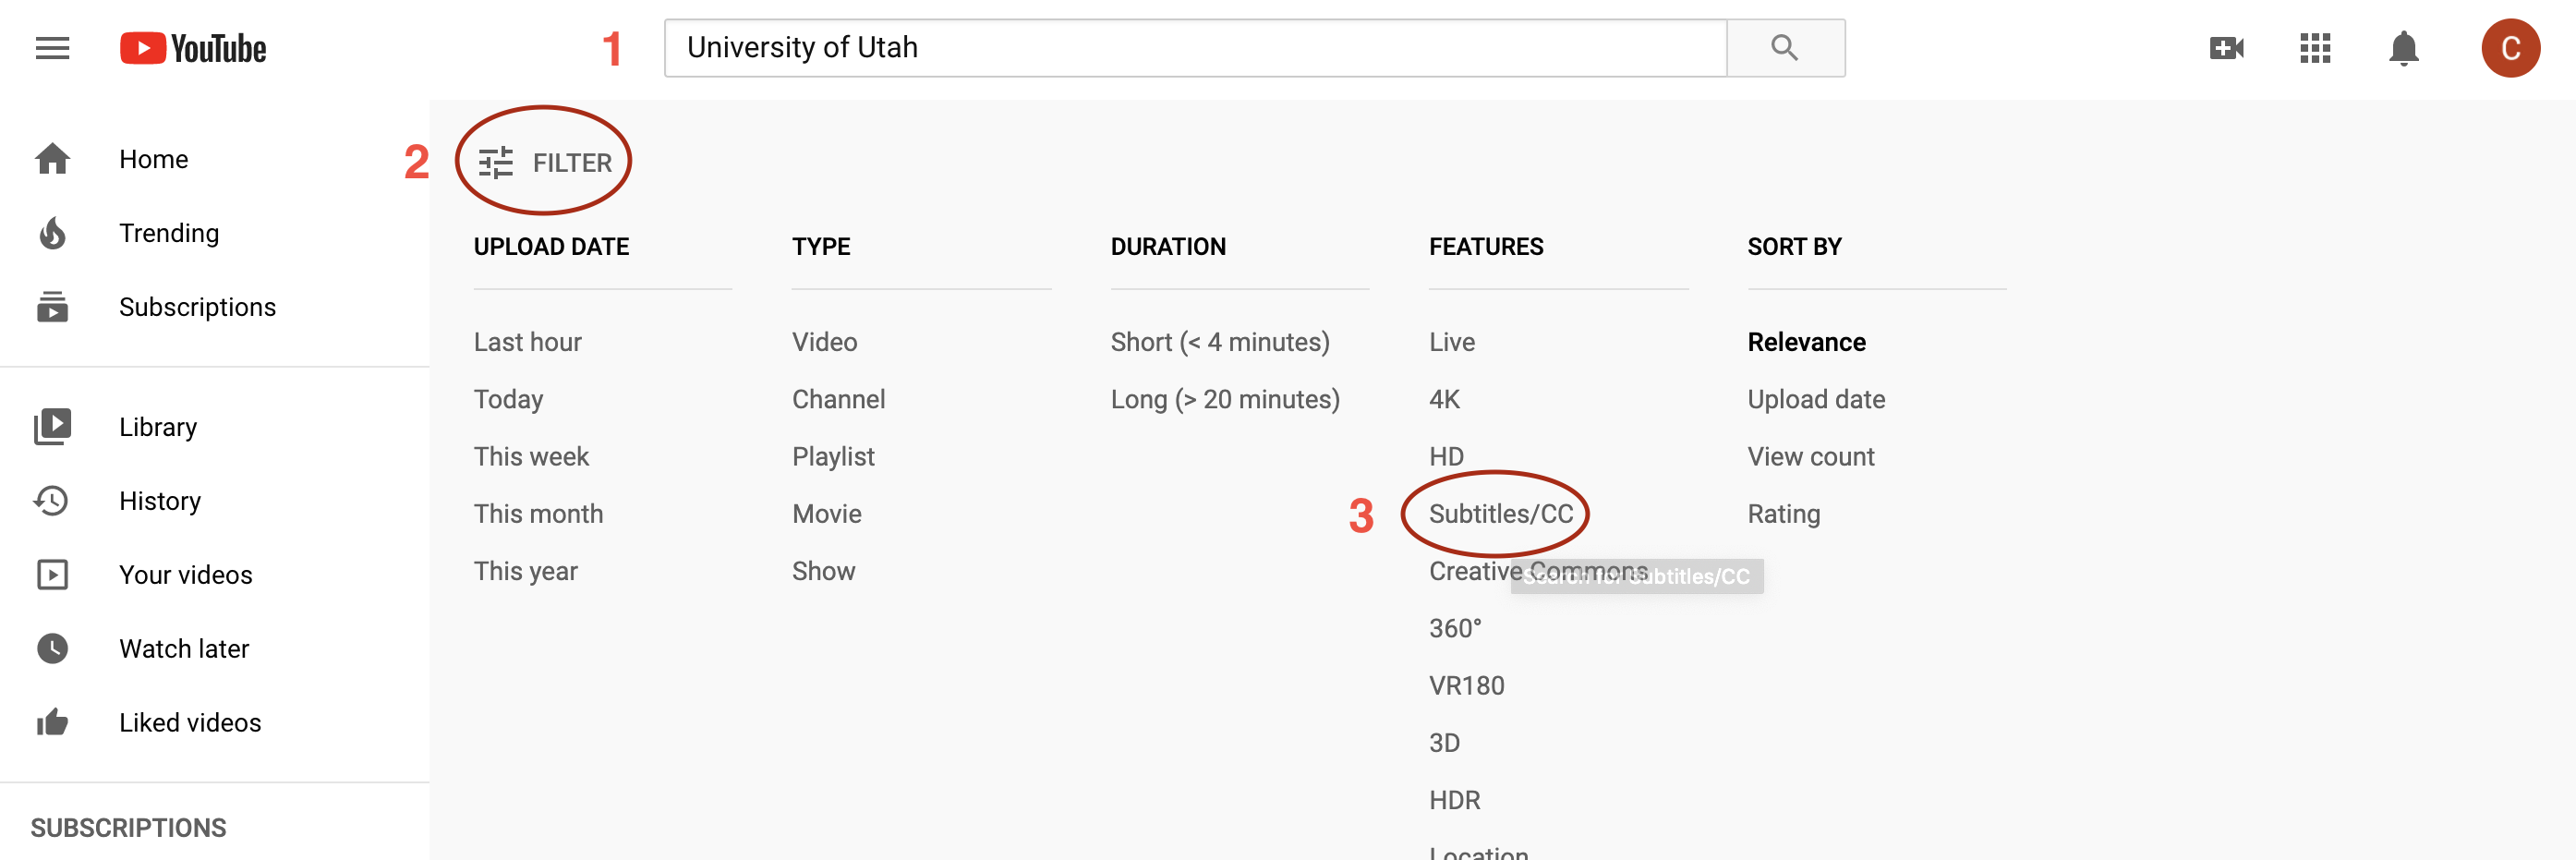 Screenshot showing the search box on youtube with the filters tool open and "Subtitles/CC" option highlighted